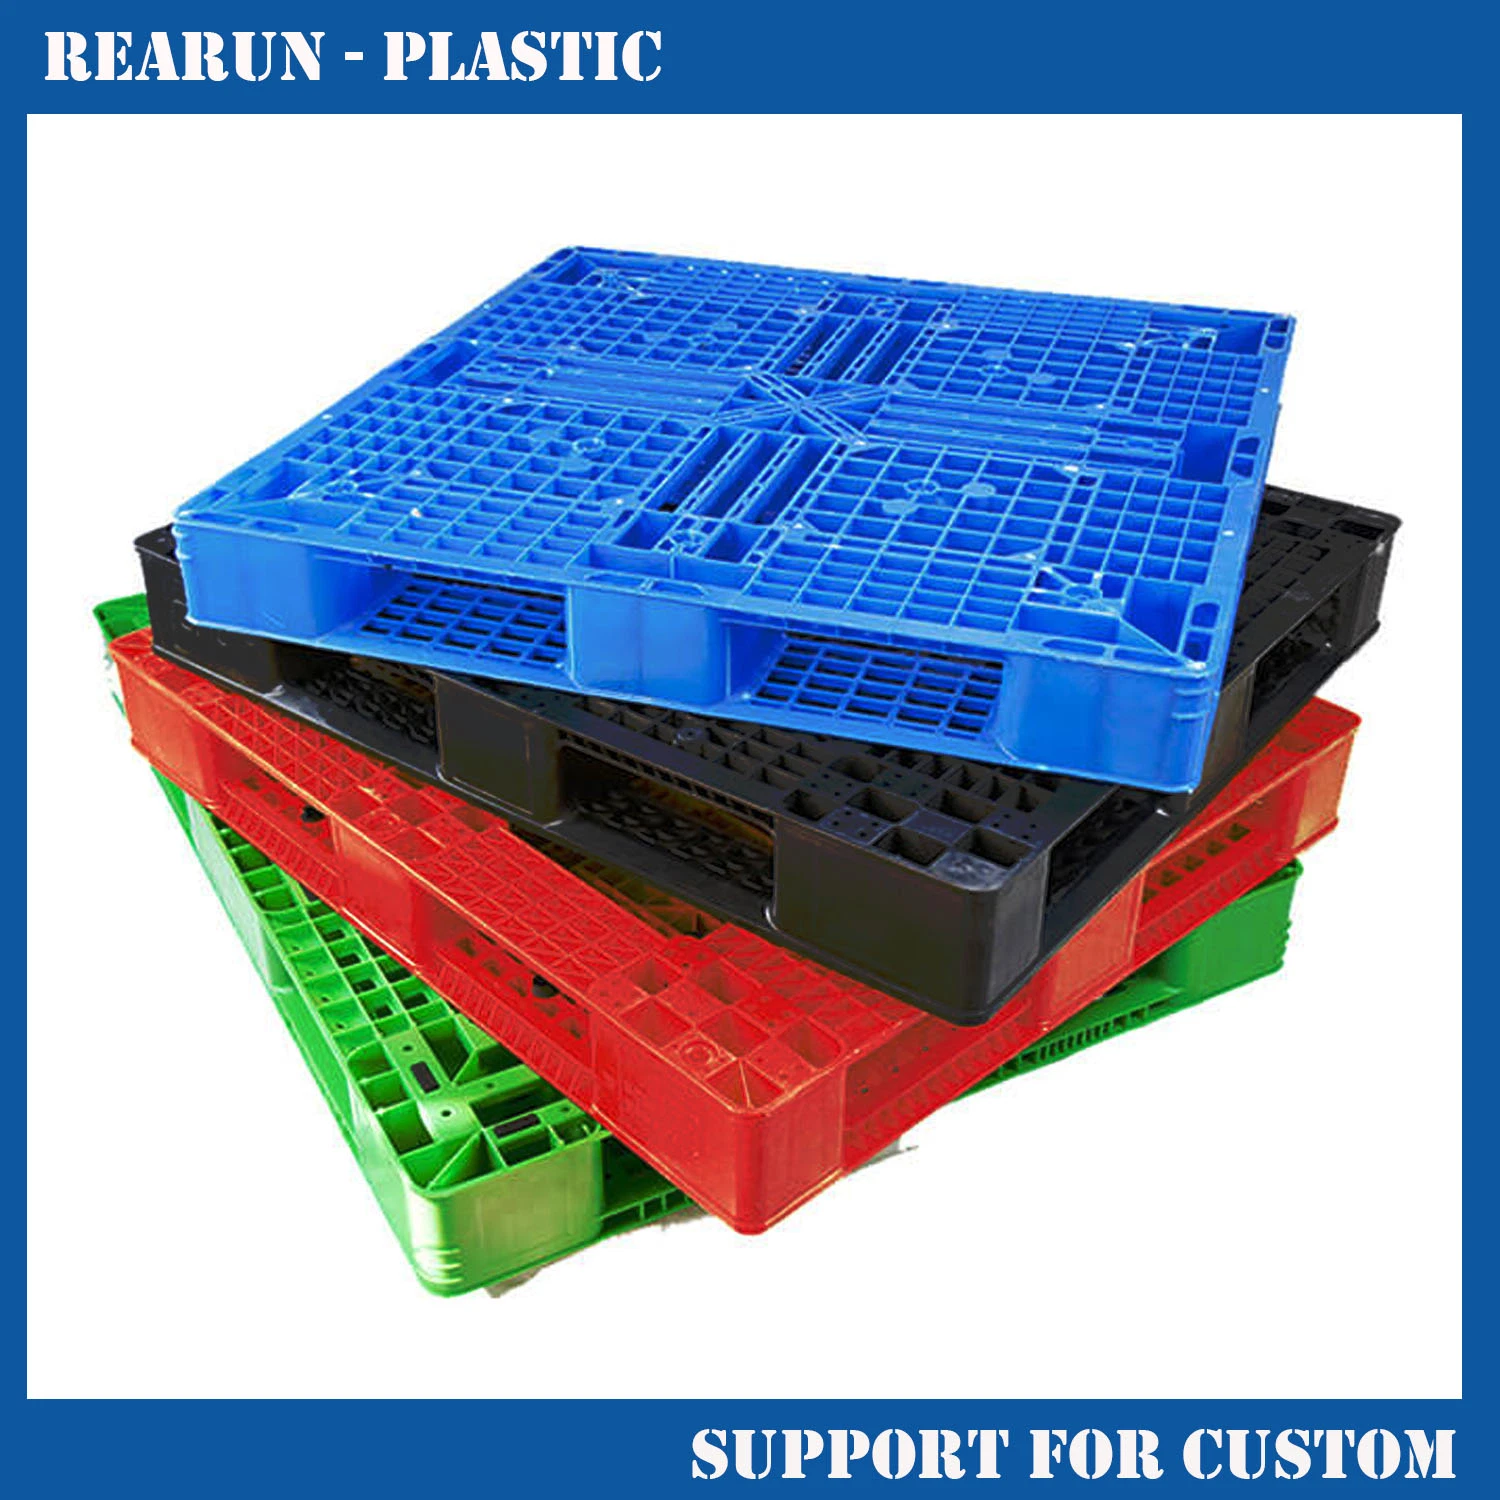 Heavy Duty Double Side Plastic Pallet for Warehouse Storage & Stacking